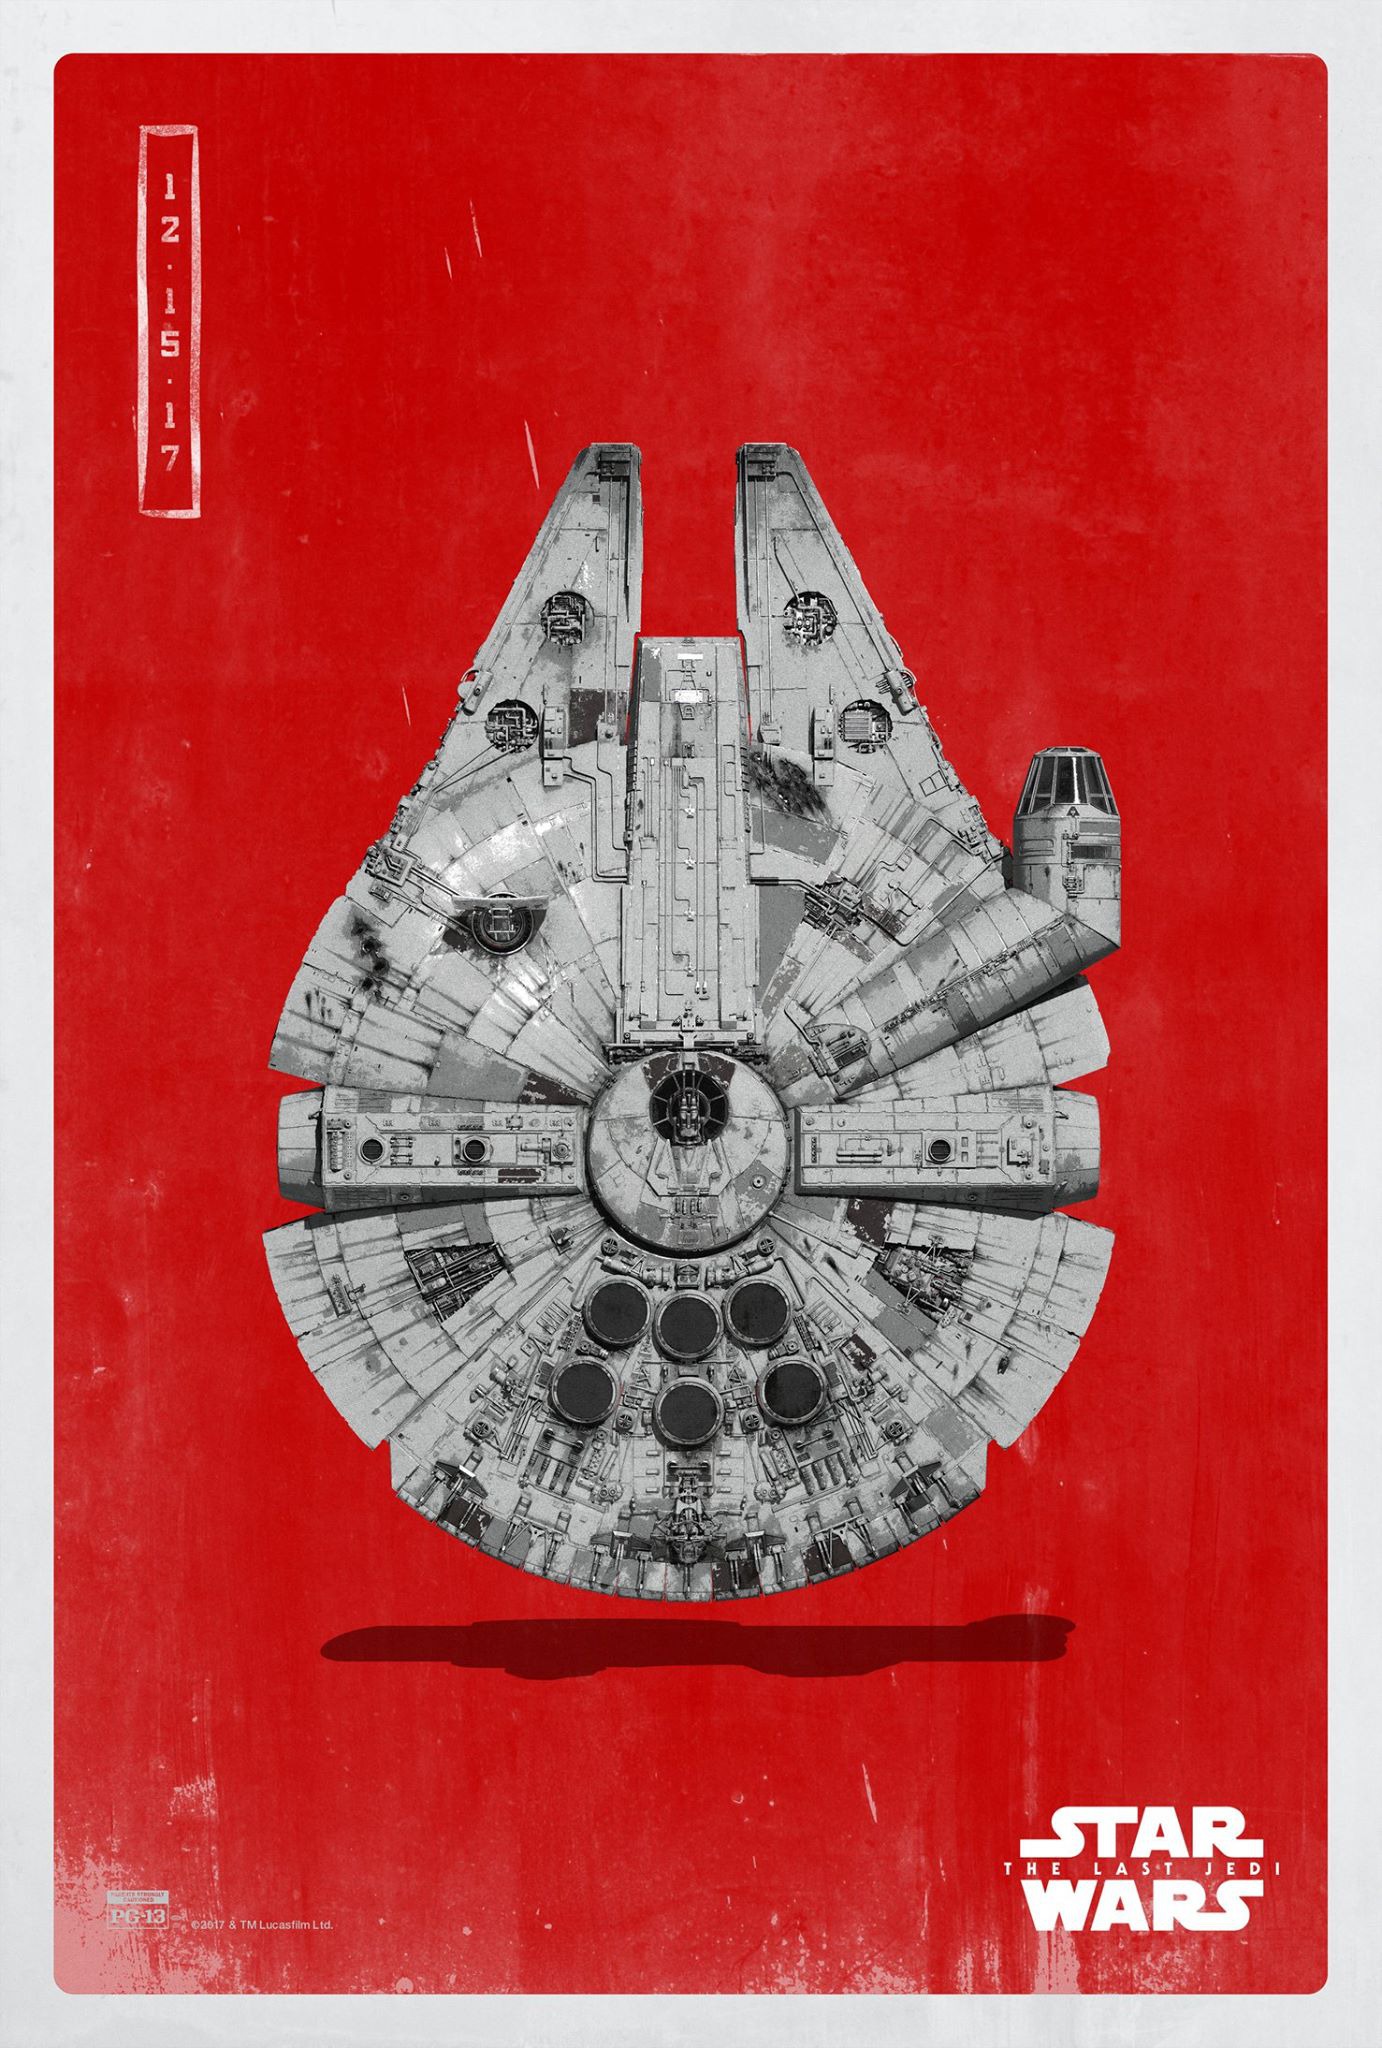 Mega Sized Movie Poster Image for Star Wars: The Last Jedi (#25 of 67)